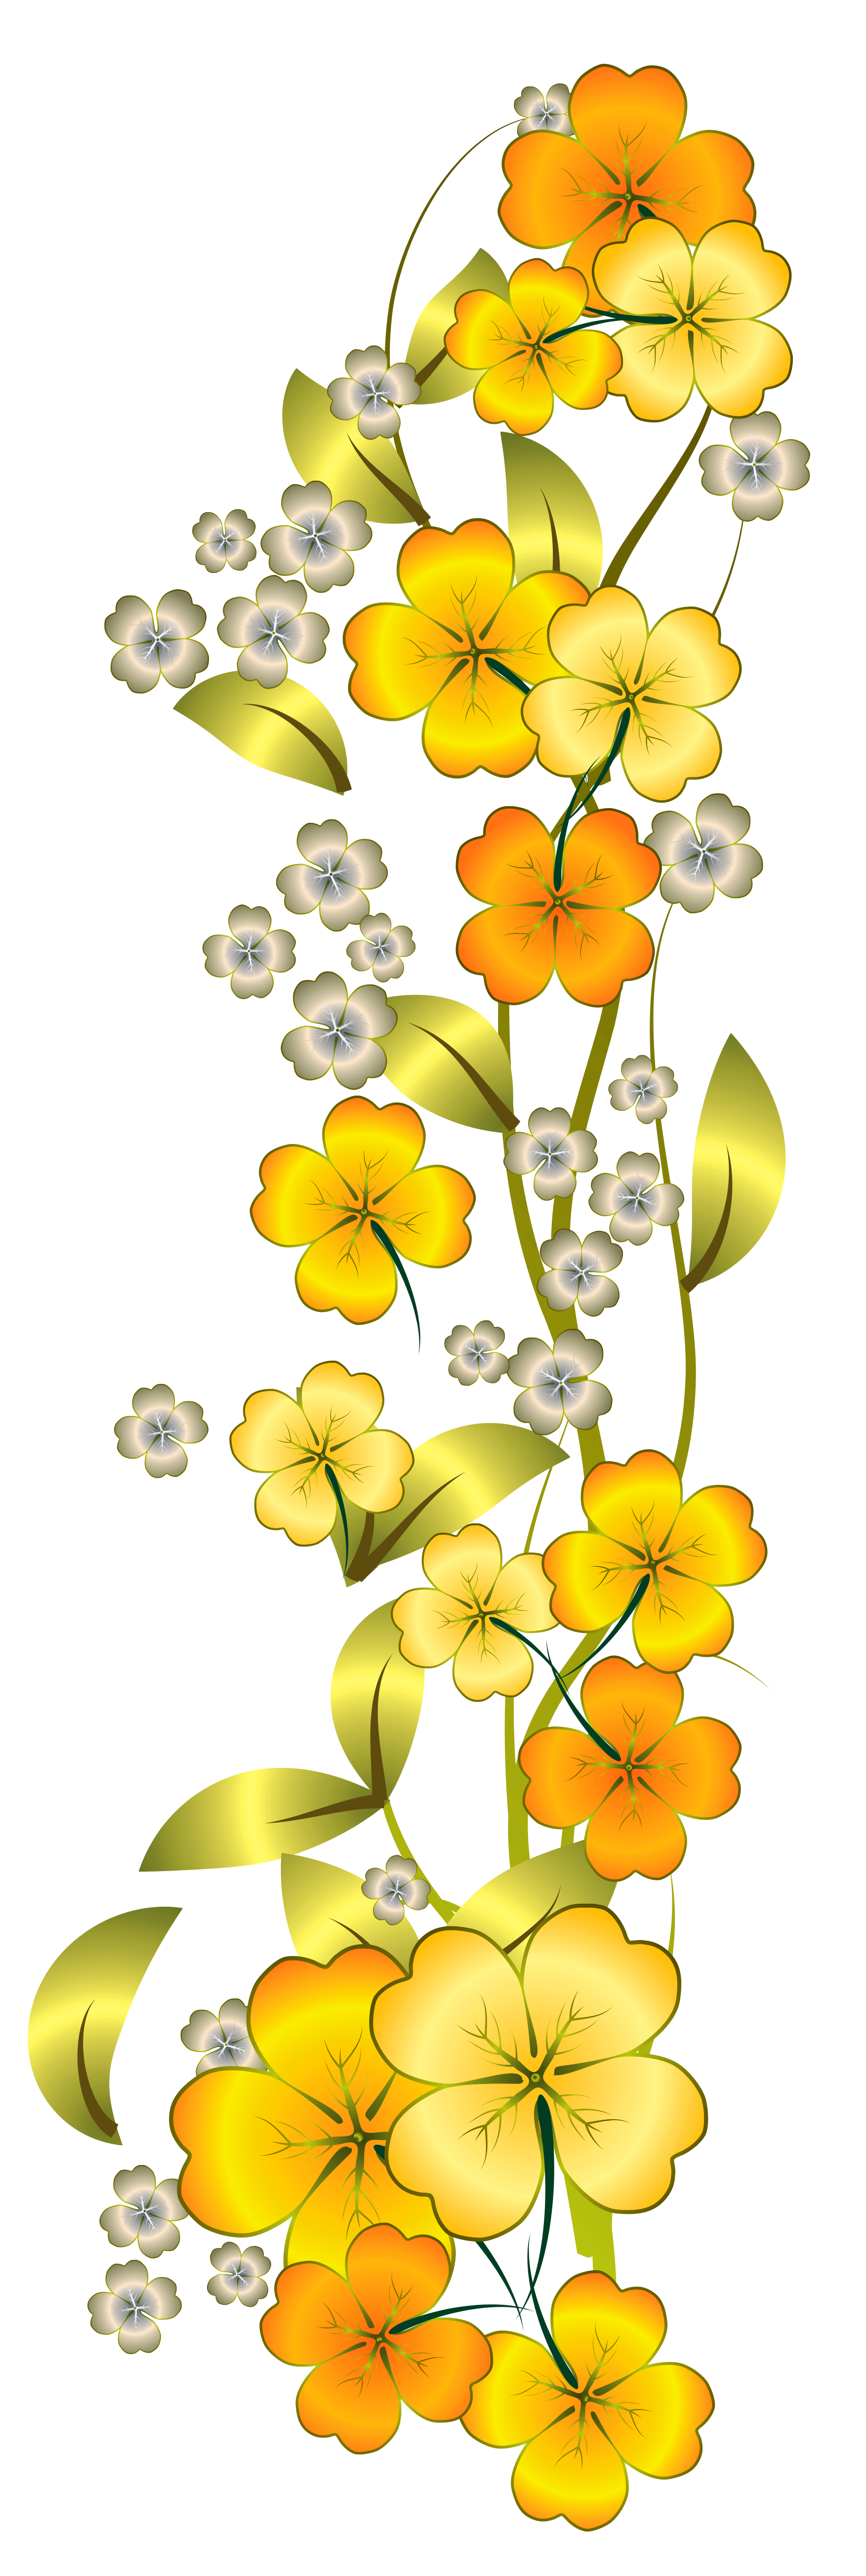 Decorative clipart november flower. Yellow decor png flowers